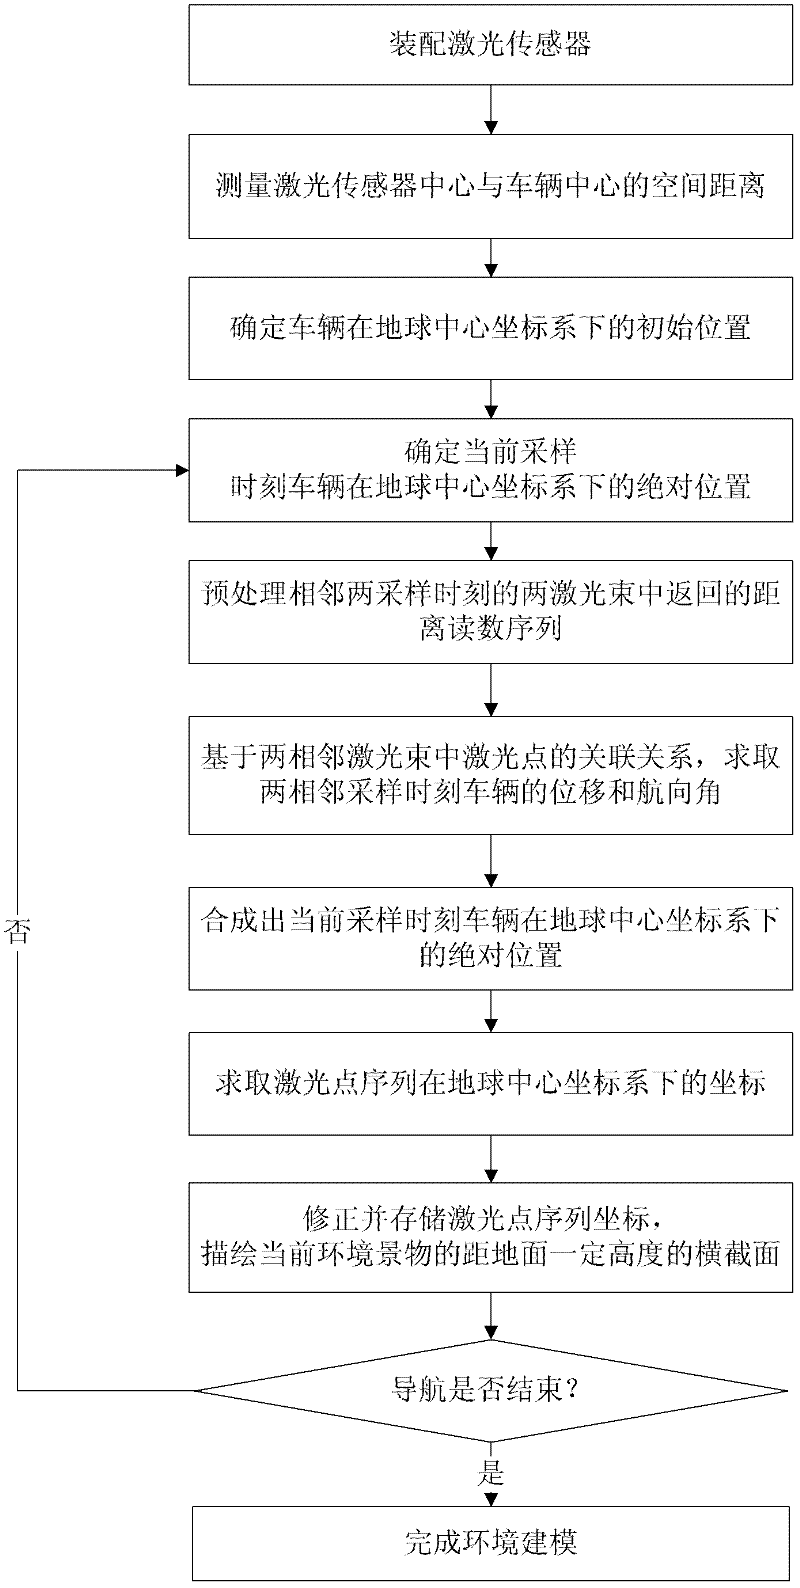 Environment modeling method applicable to navigation of automatic piloting vehicles